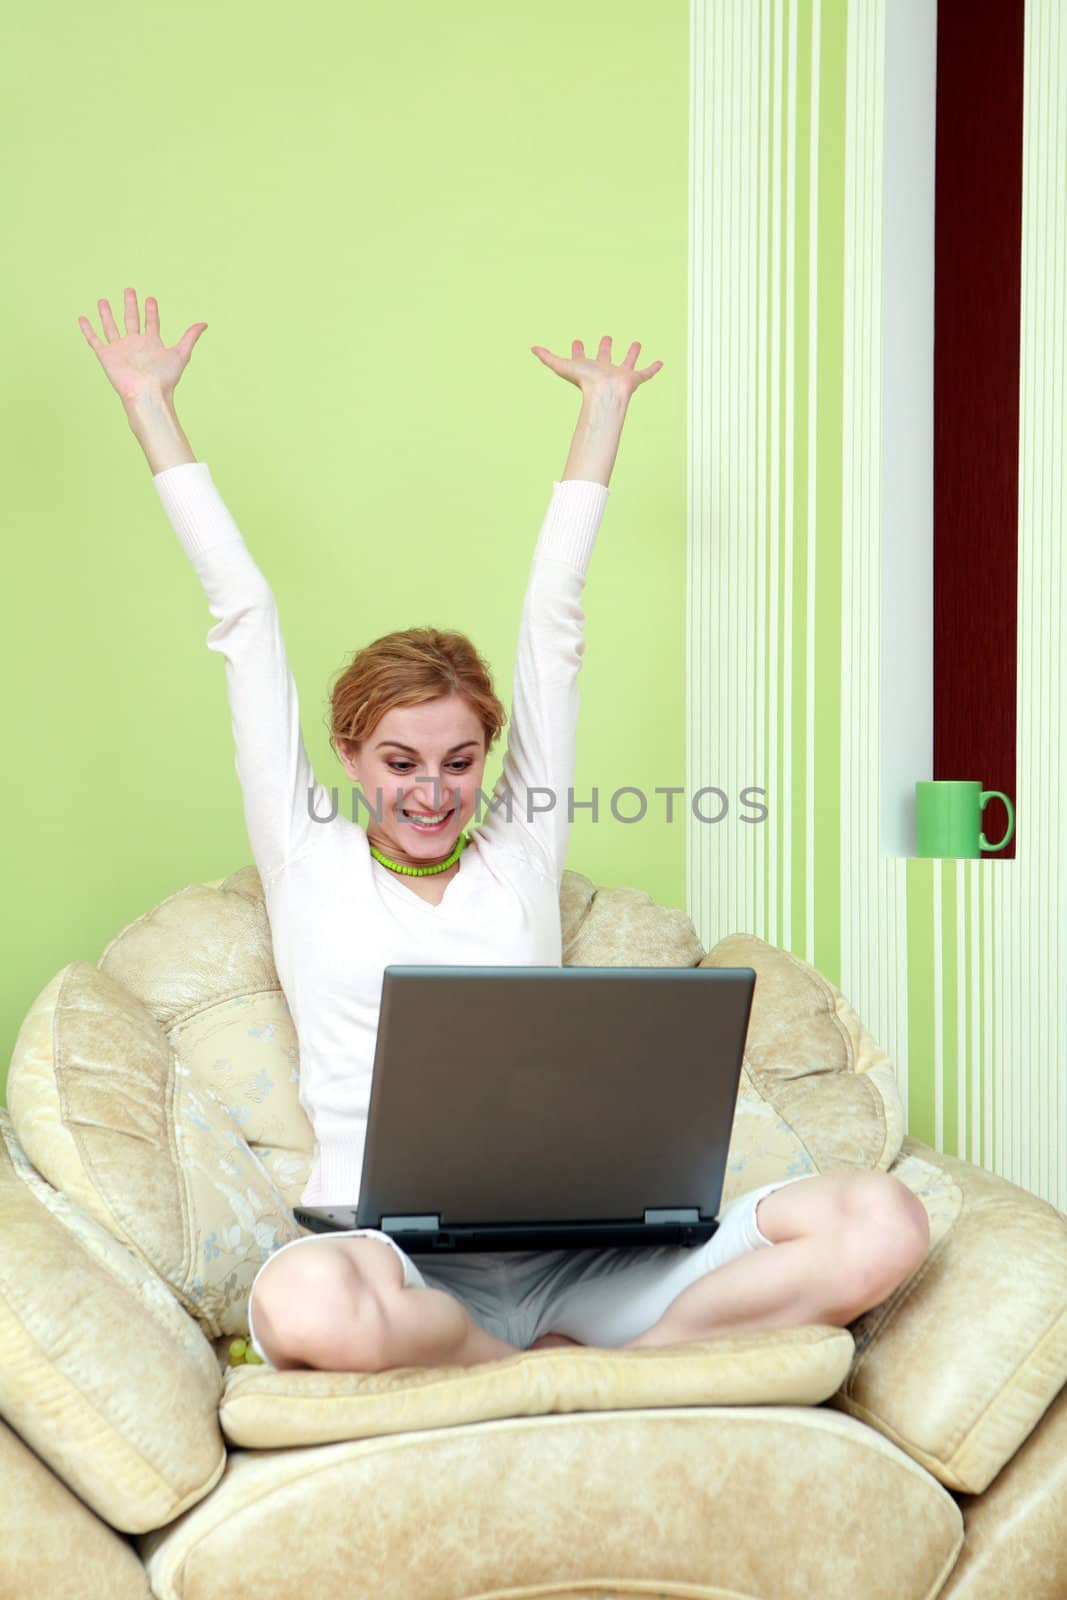 An image of young girl with a laptop at home